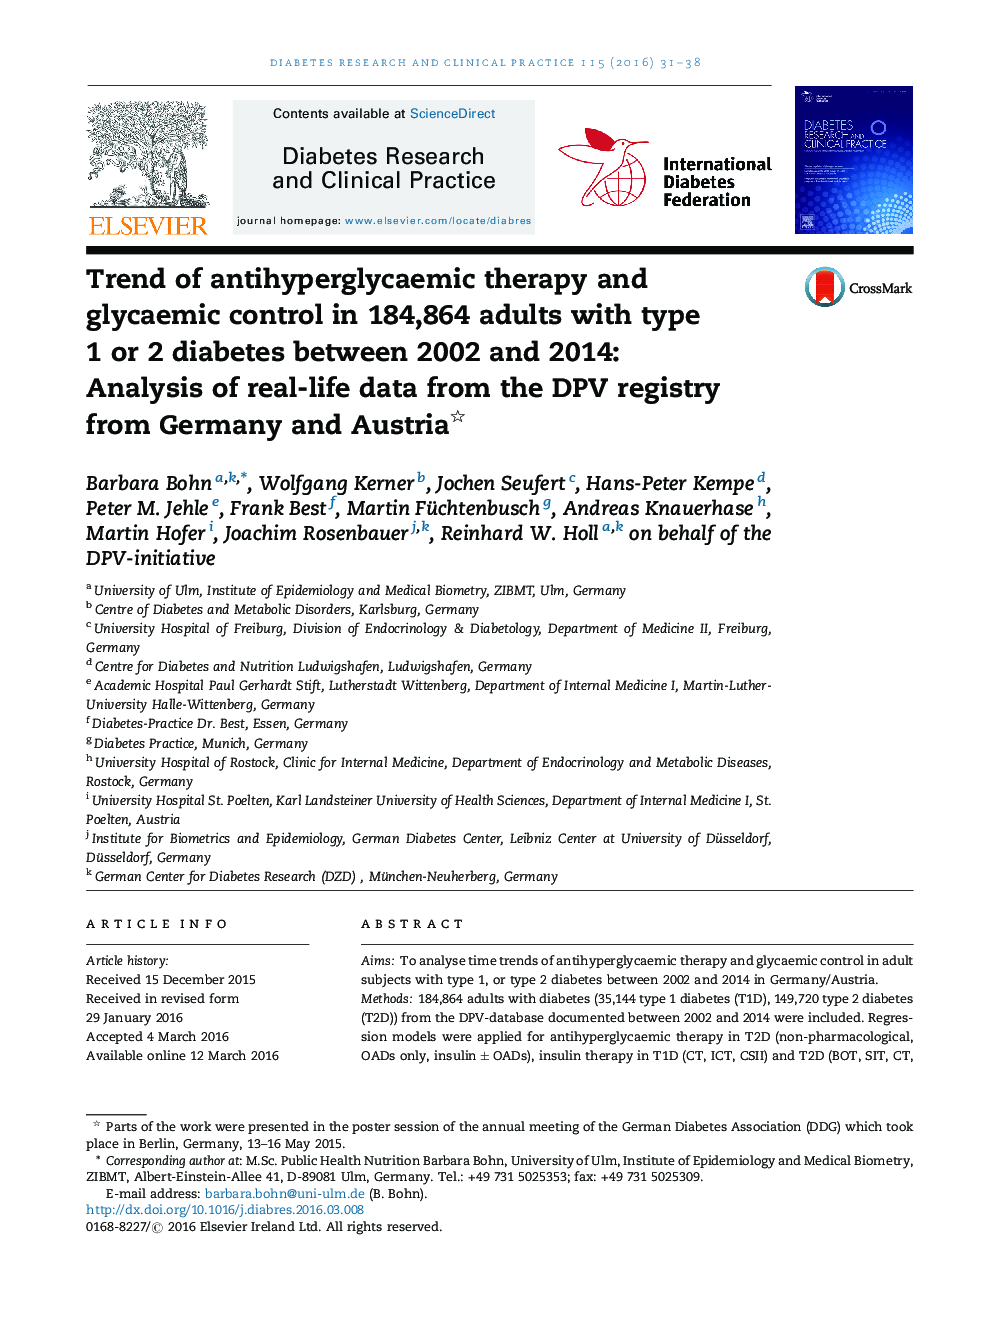 Trend of antihyperglycaemic therapy and glycaemic control in 184,864 adults with type 1 or 2 diabetes between 2002 and 2014: Analysis of real-life data from the DPV registry from Germany and Austria